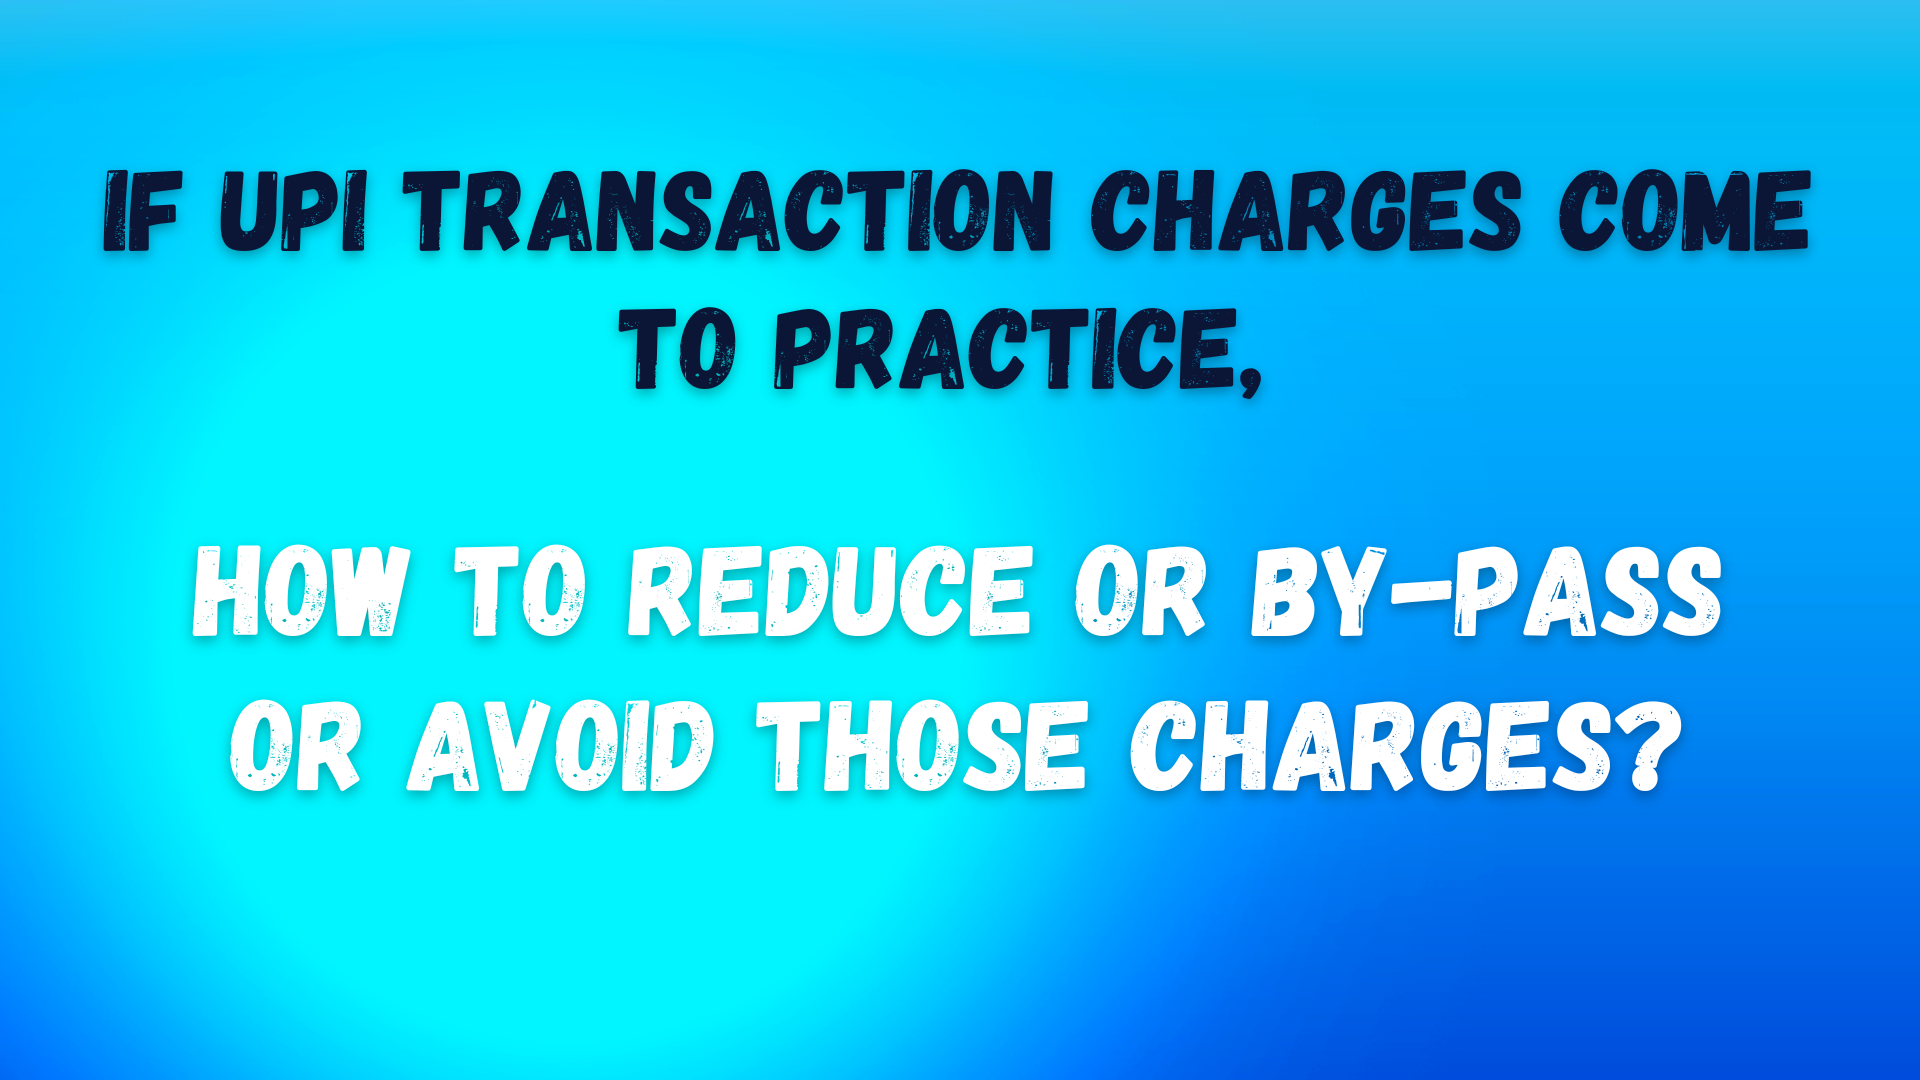 If UPI Transaction Charges Come To Practice, How To Reduce Or By-Pass Or Avoid Those Charges?